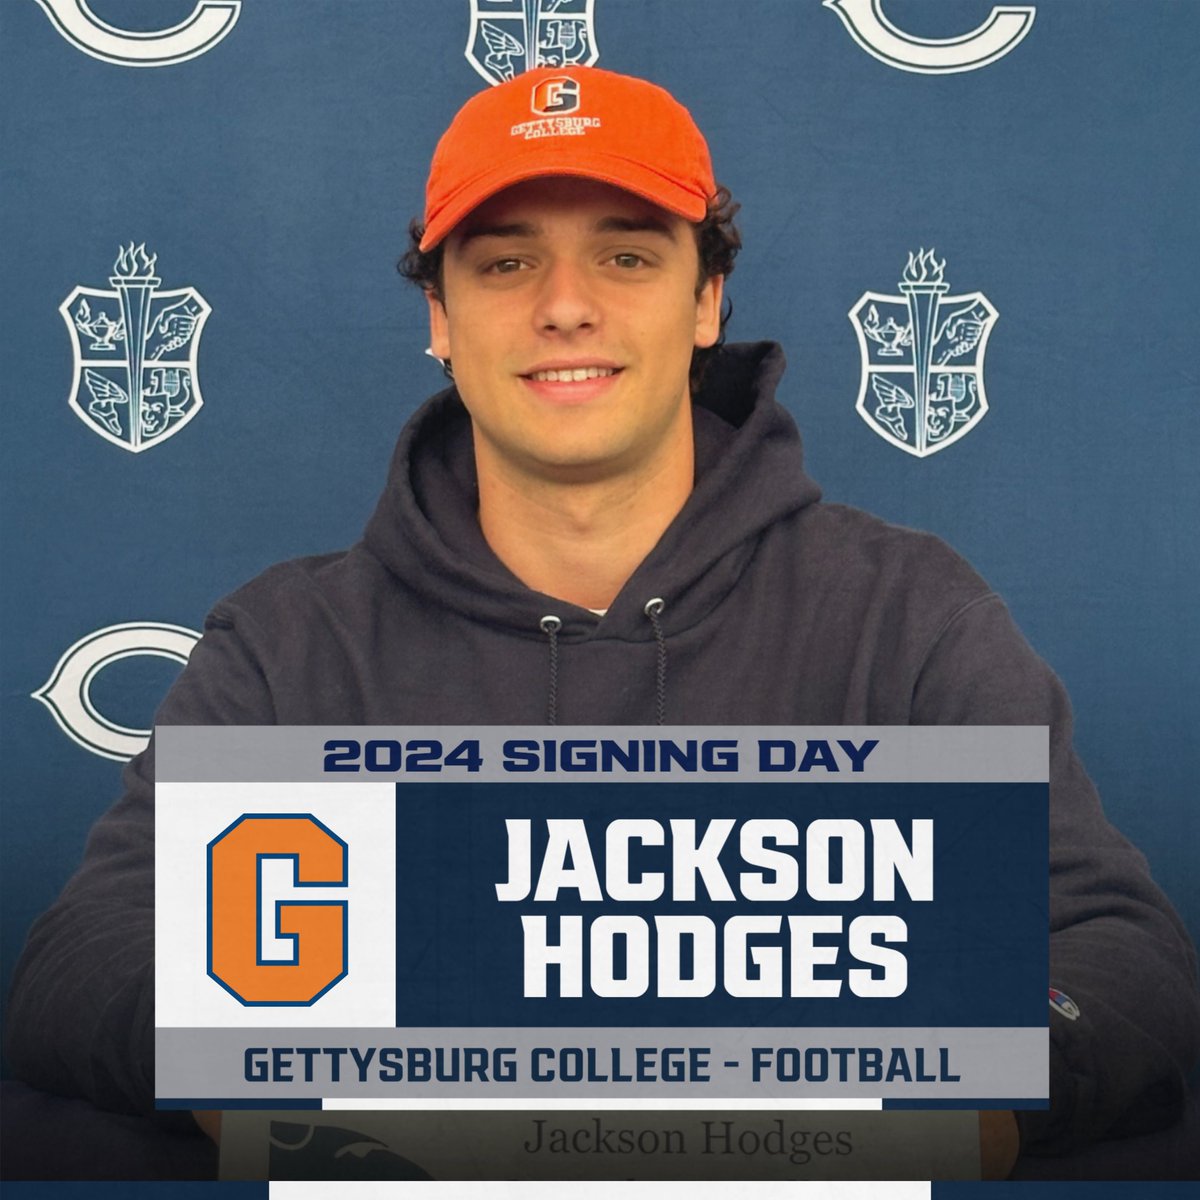 Congratulations to Jackson Hodges who has committed to play football for Gettysburg College next year! Best of Luck as you continue your athletic career! @ChathamCougars @Athletics_CHS @ChathamsTAP @dailyrecordspts @ChathamCourier1 @ChathamHS @gburgbullets